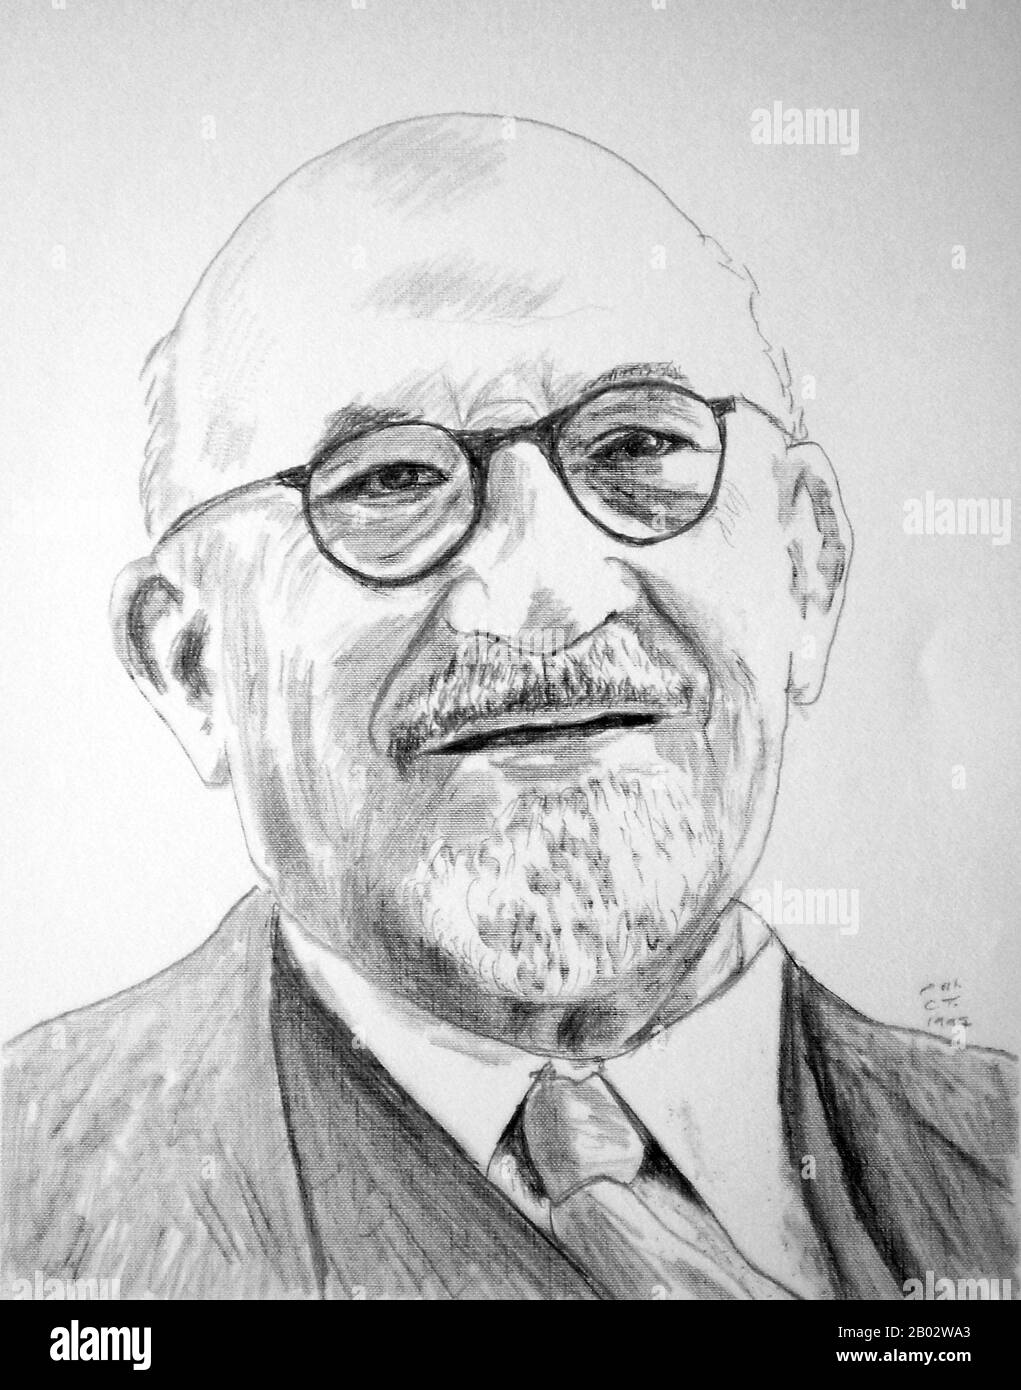 Chaim Azriel Weizmann (27 November 1874 – 9 November 1952) was a Zionist leader and Israeli statesman who served as President of the Zionist Organization and later as the first President of Israel. He was elected on 16 February 1949, and served until his death in 1952. Weizmann convinced the United States government to recognize the newly formed state of Israel.  Weizmann was also a biochemist who developed the acetone–butanol–ethanol fermentation process, which produces acetone through bacterial fermentation. His acetone production method was of great importance for the British war industry d Stock Photo